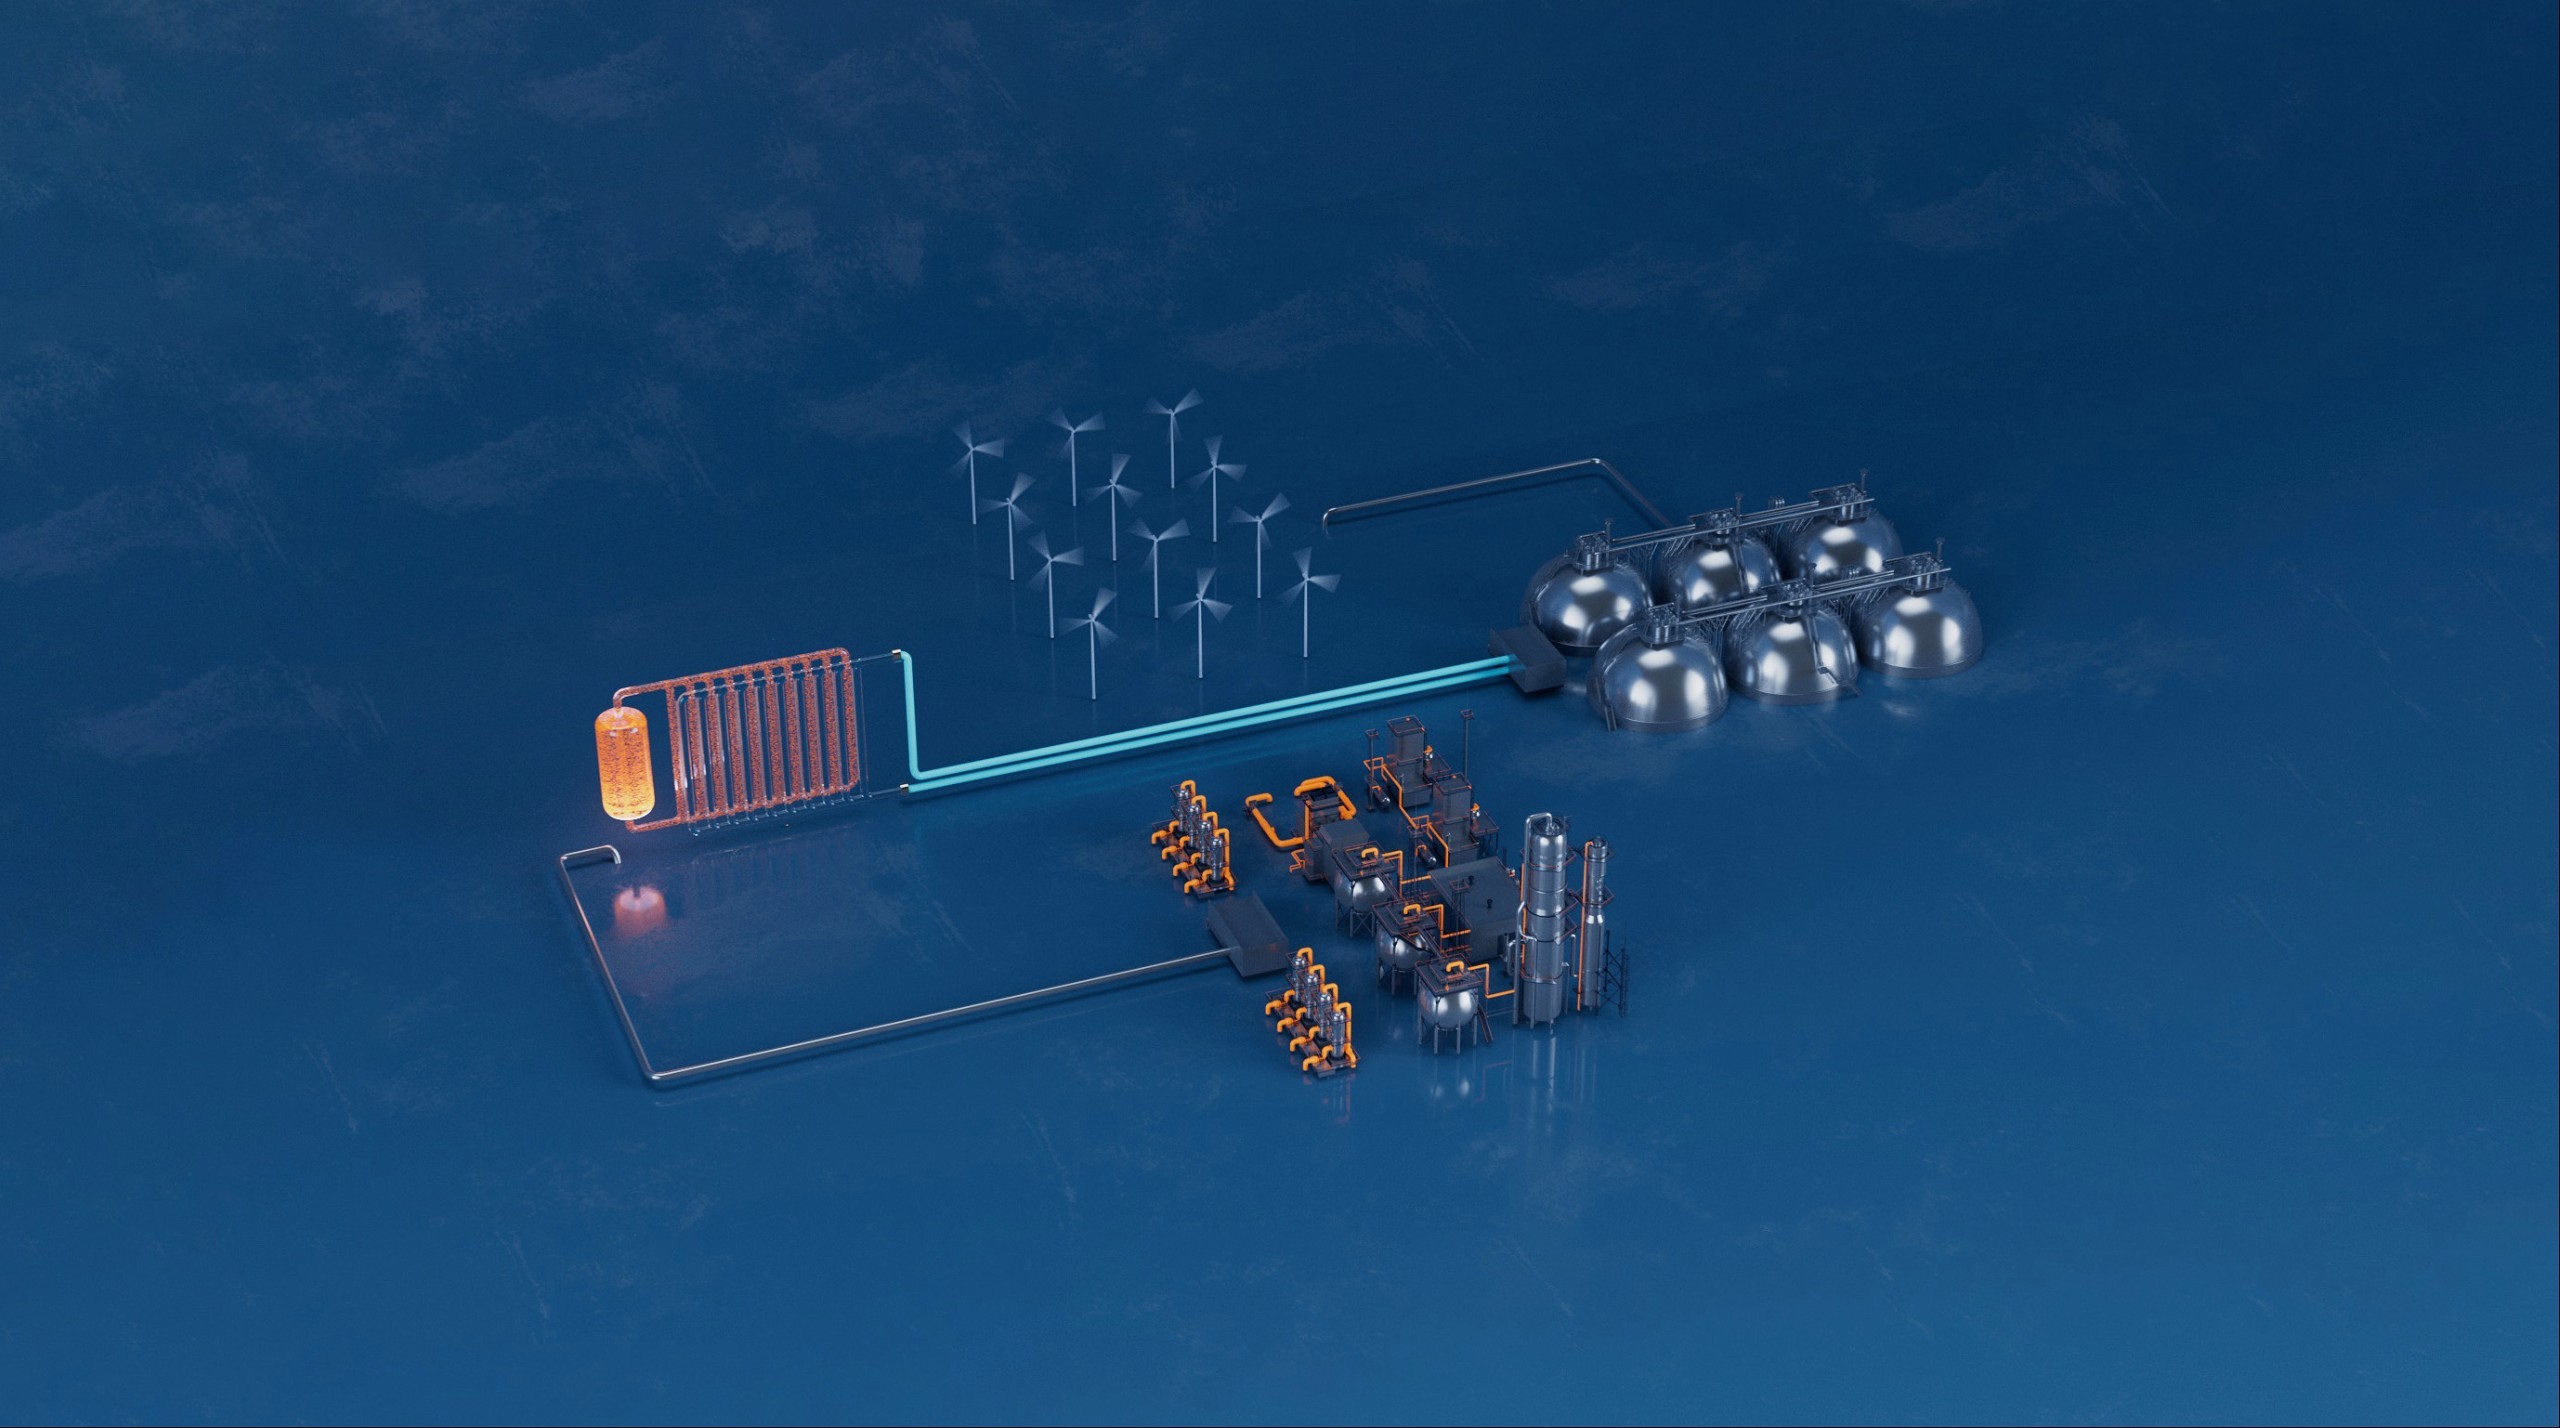 Elestor energy storage system connected to hydrogen infrastructure